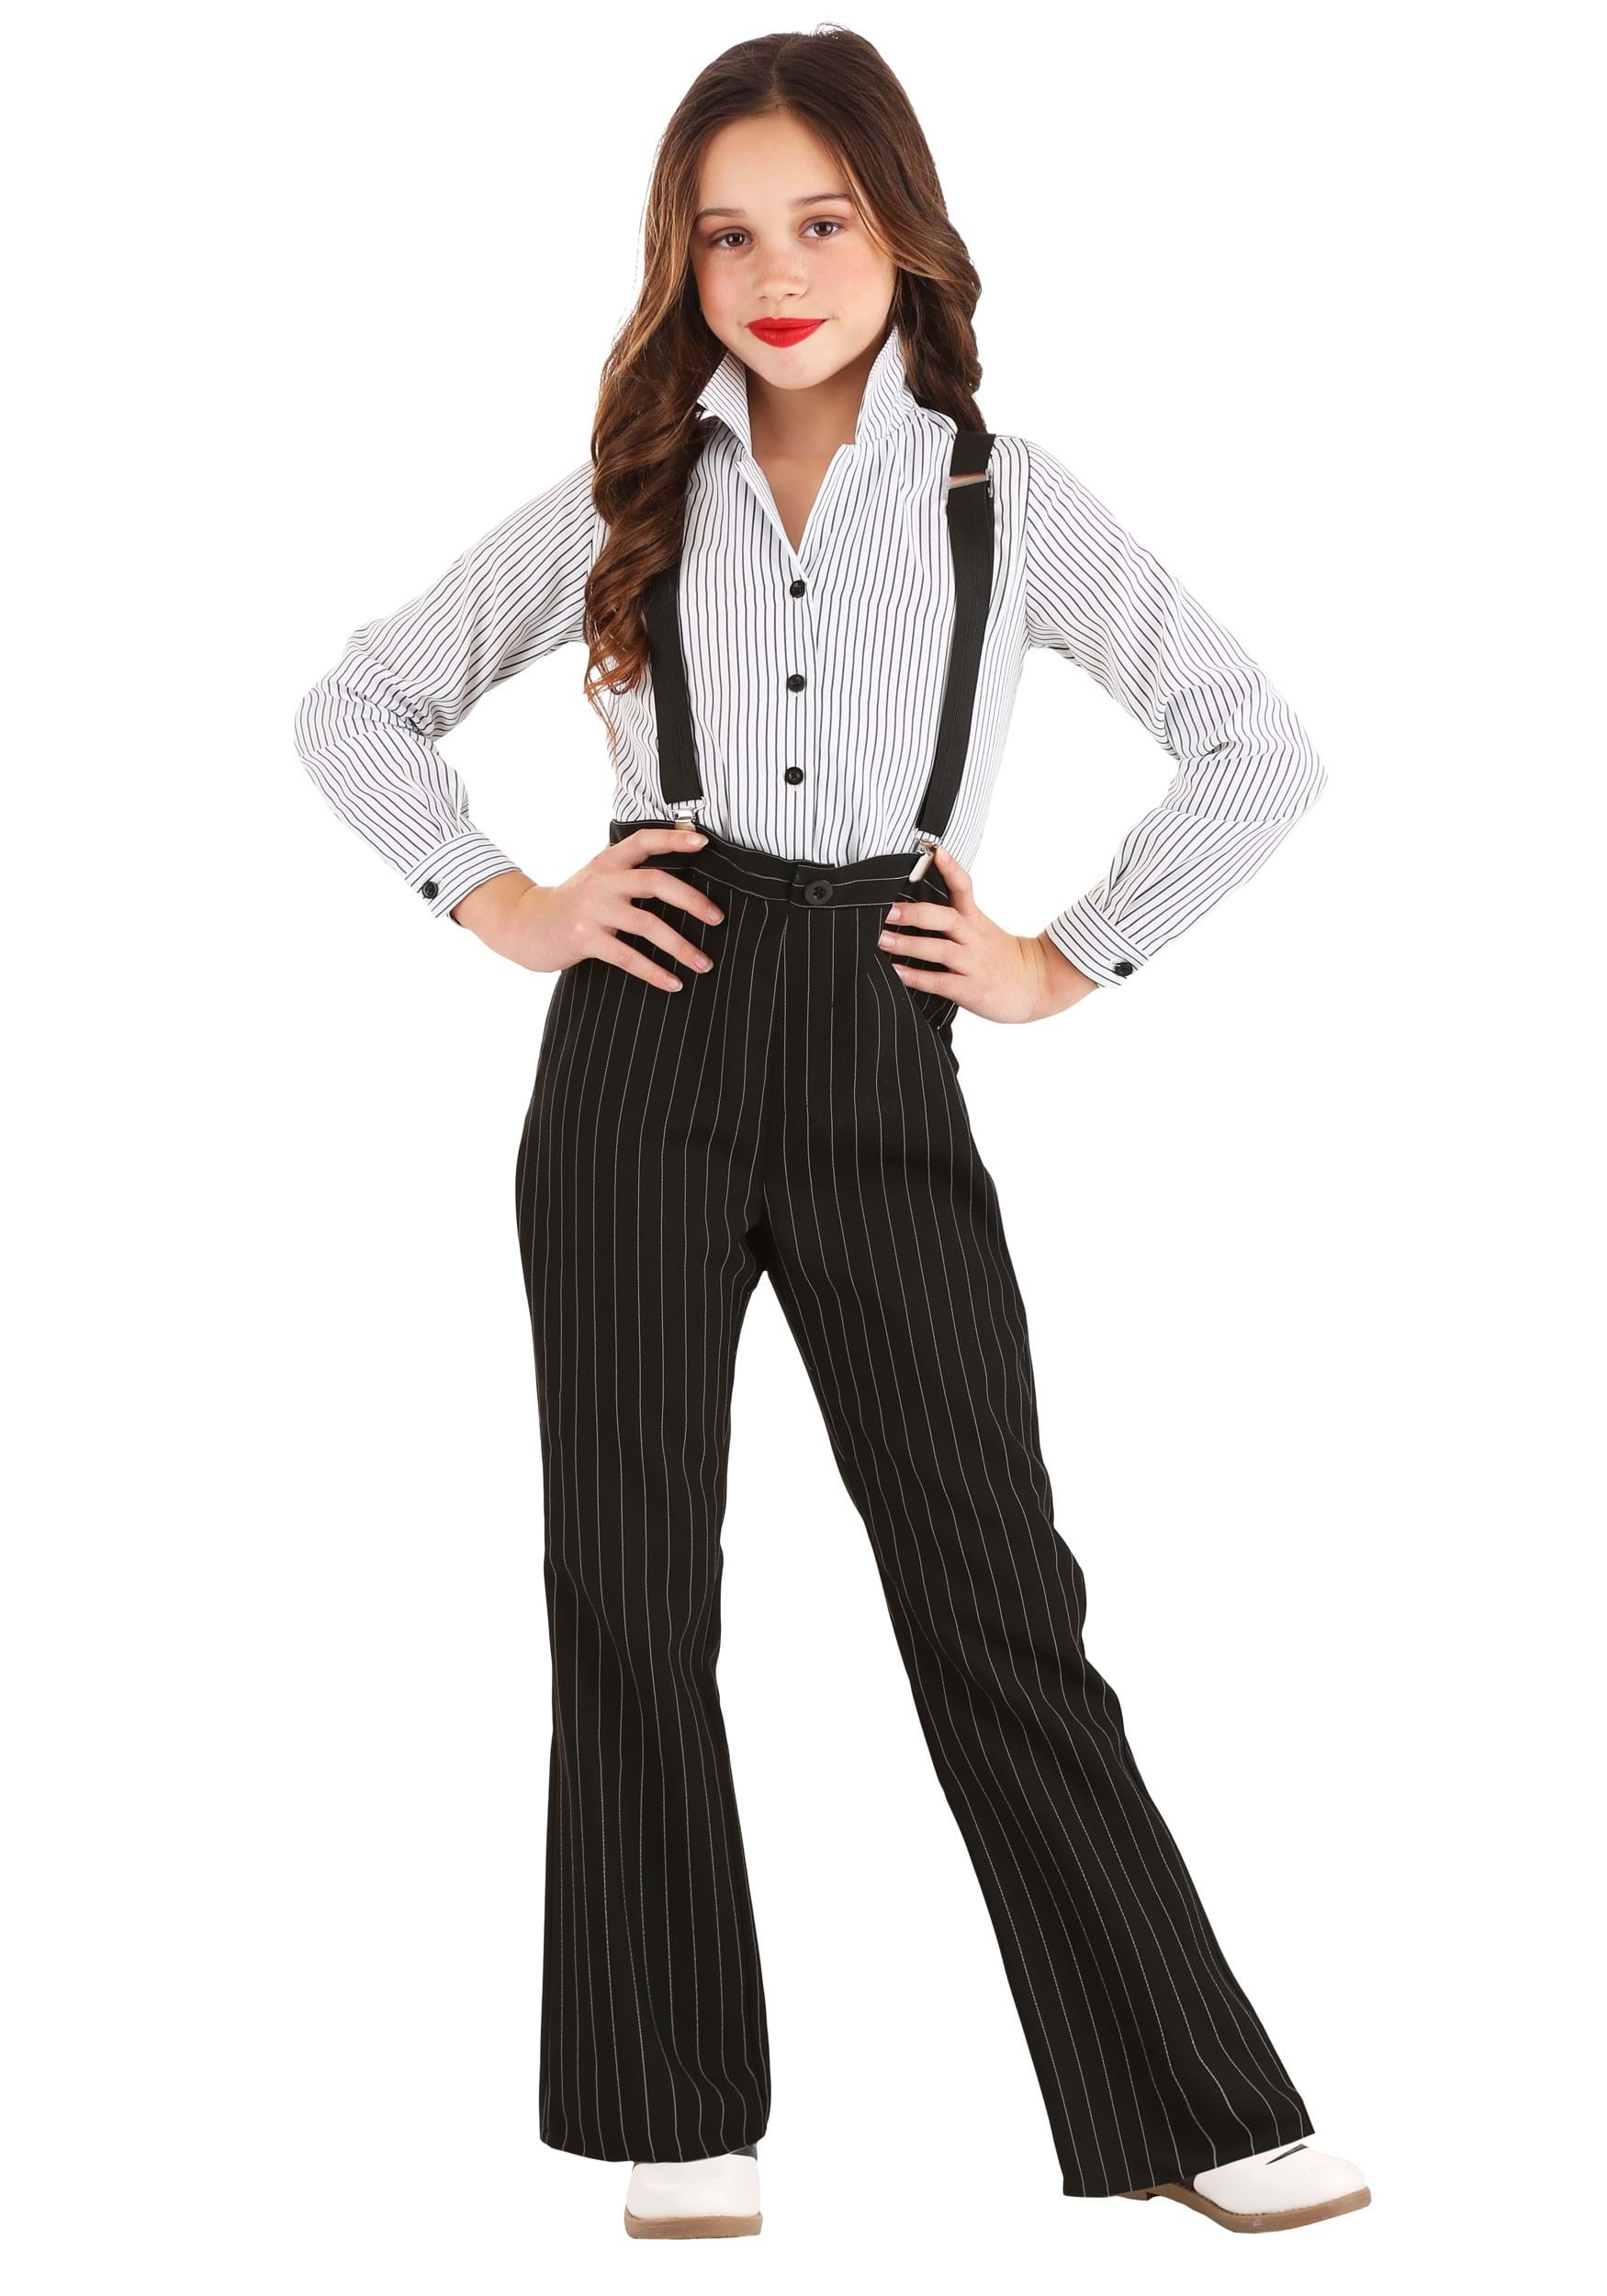 Photos - Fancy Dress A&D FUN Costumes Gangster Lady Girl's Costume | 1920s Costumes and Accessories 